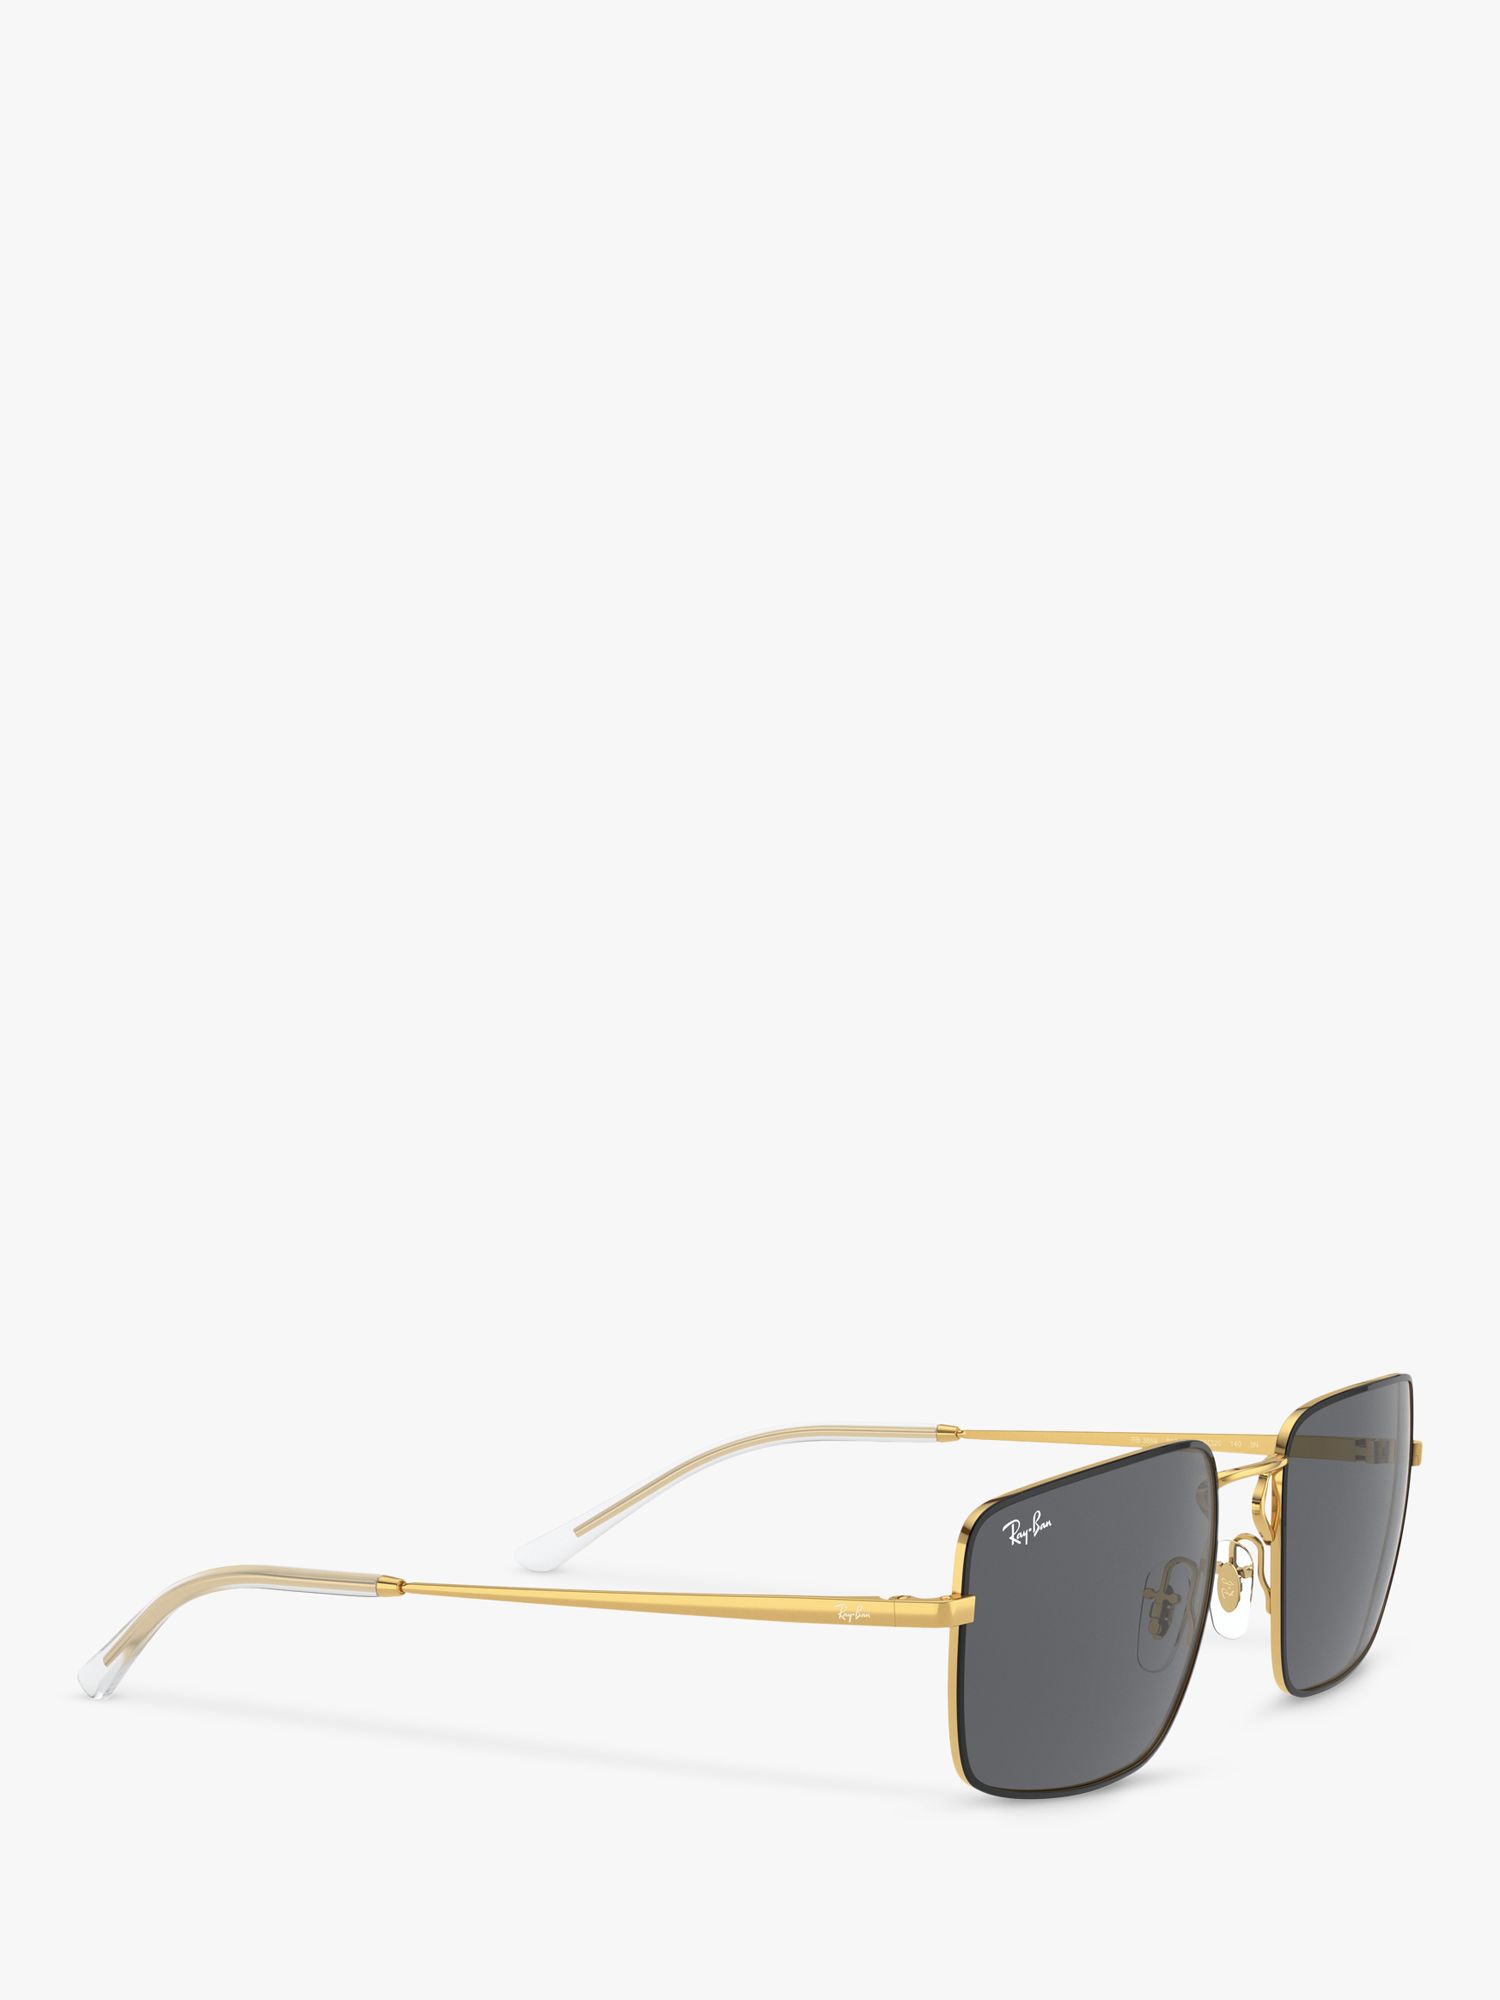 Ray-Ban RB3669 Unisex Metal Square Sunglasses, Arista Gold/Black at ...